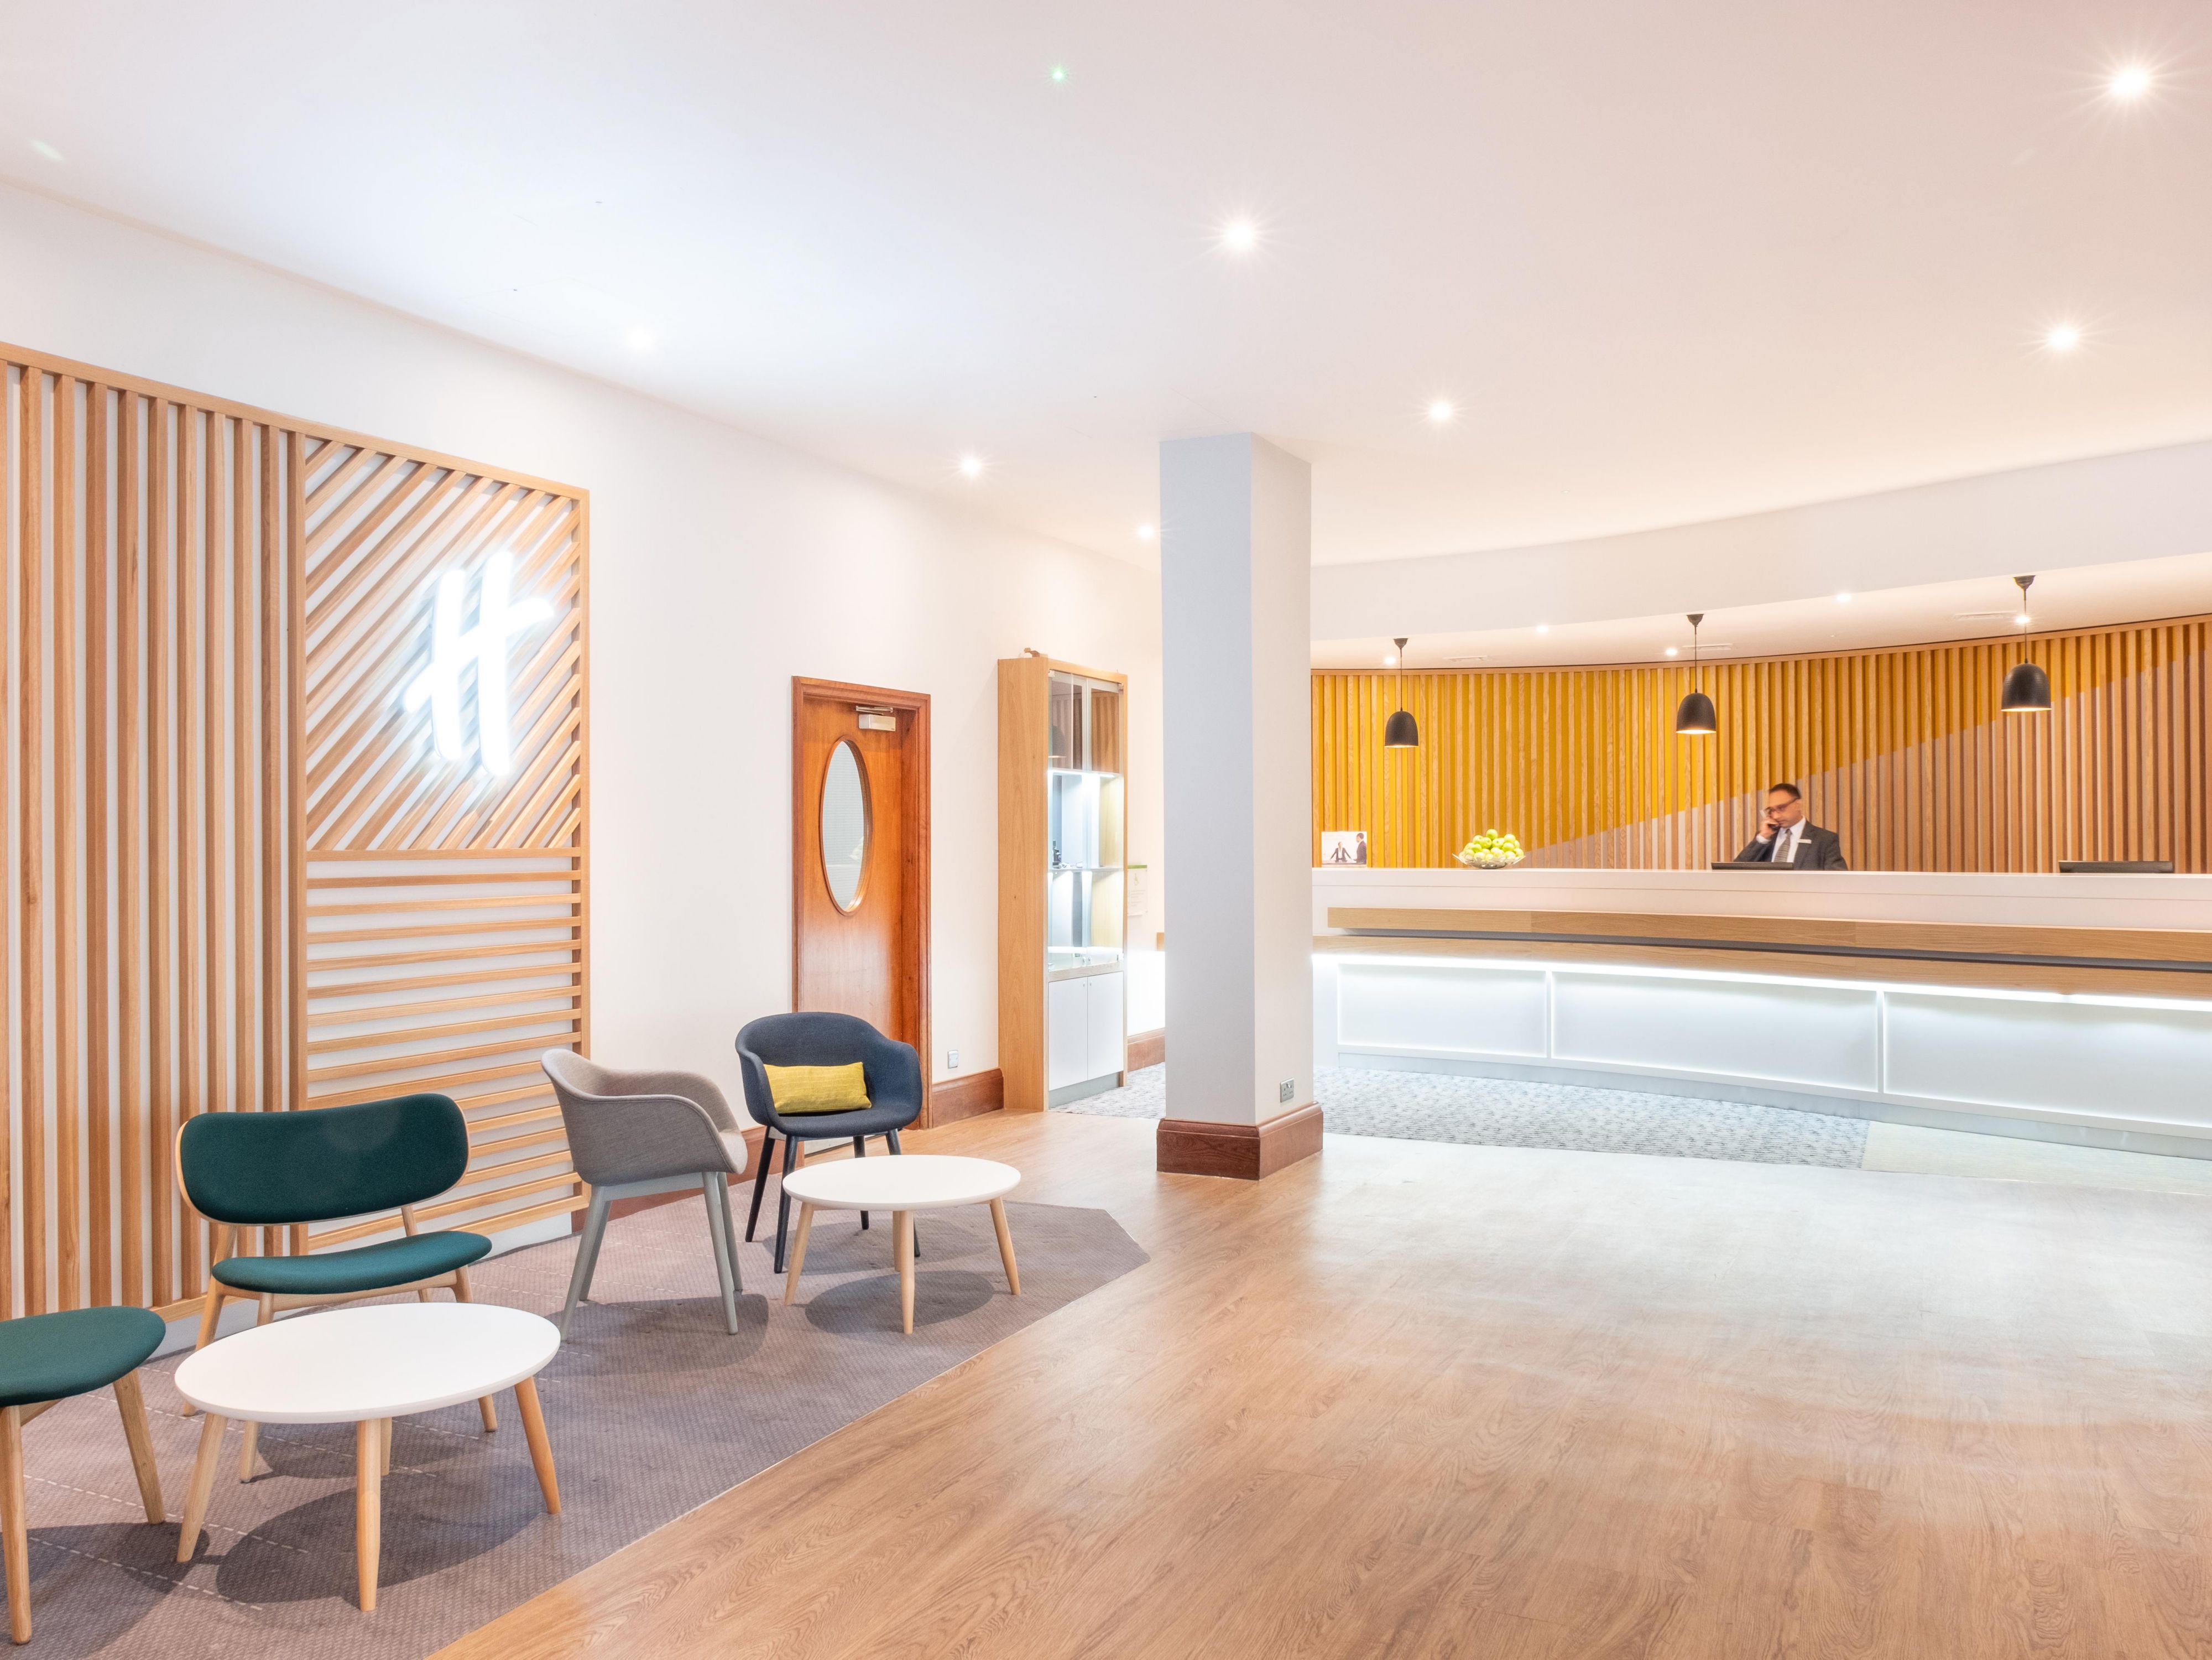 Take a virtual tour of  Holiday Inn Leicester, featuring the meetings, and event spaces, bedrooms and restaurant facilities.